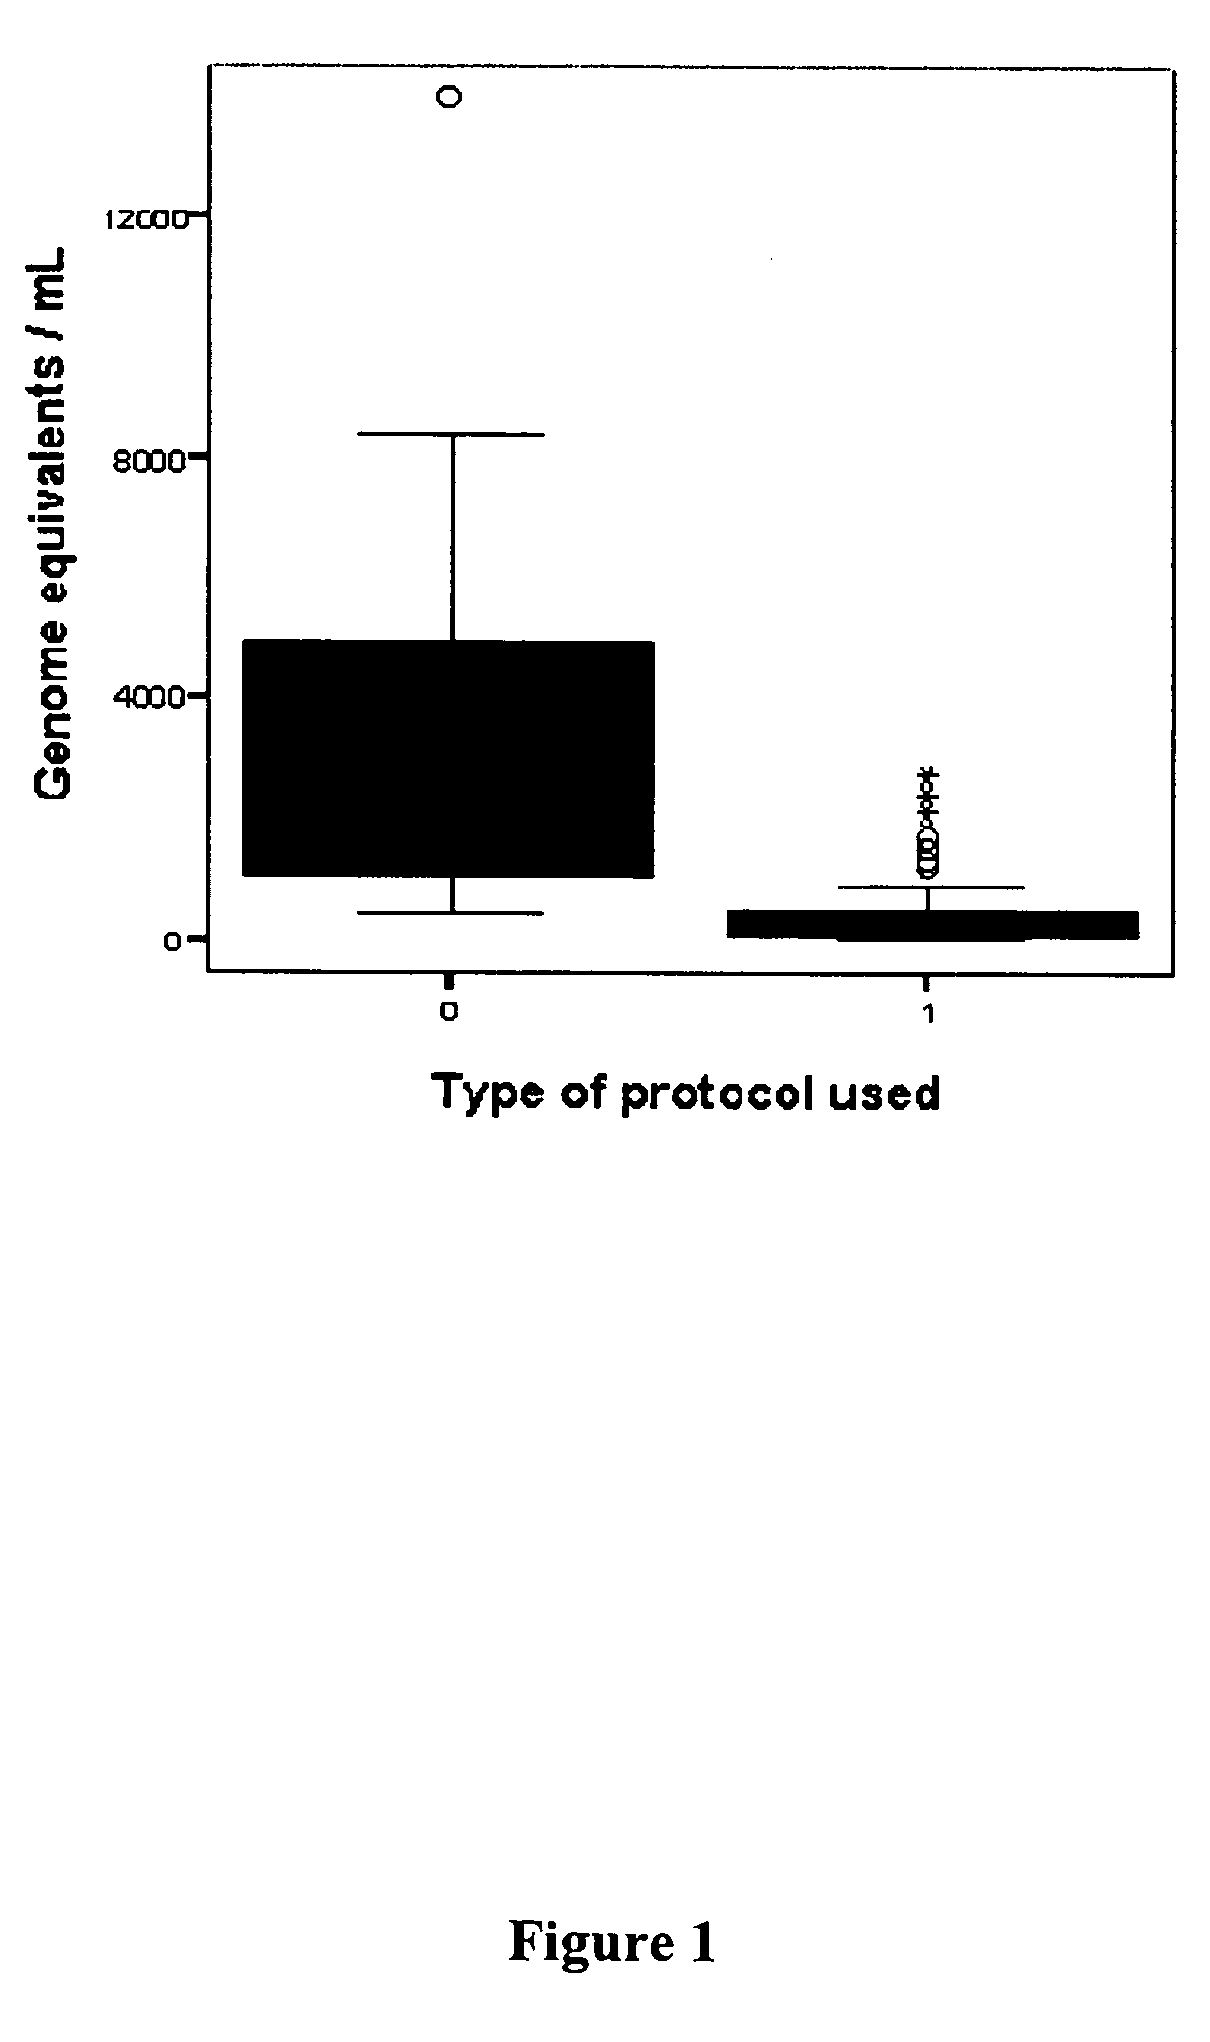 Amniotic fluid cell-free fetal DNA fragment size pattern for prenatal diagnosis